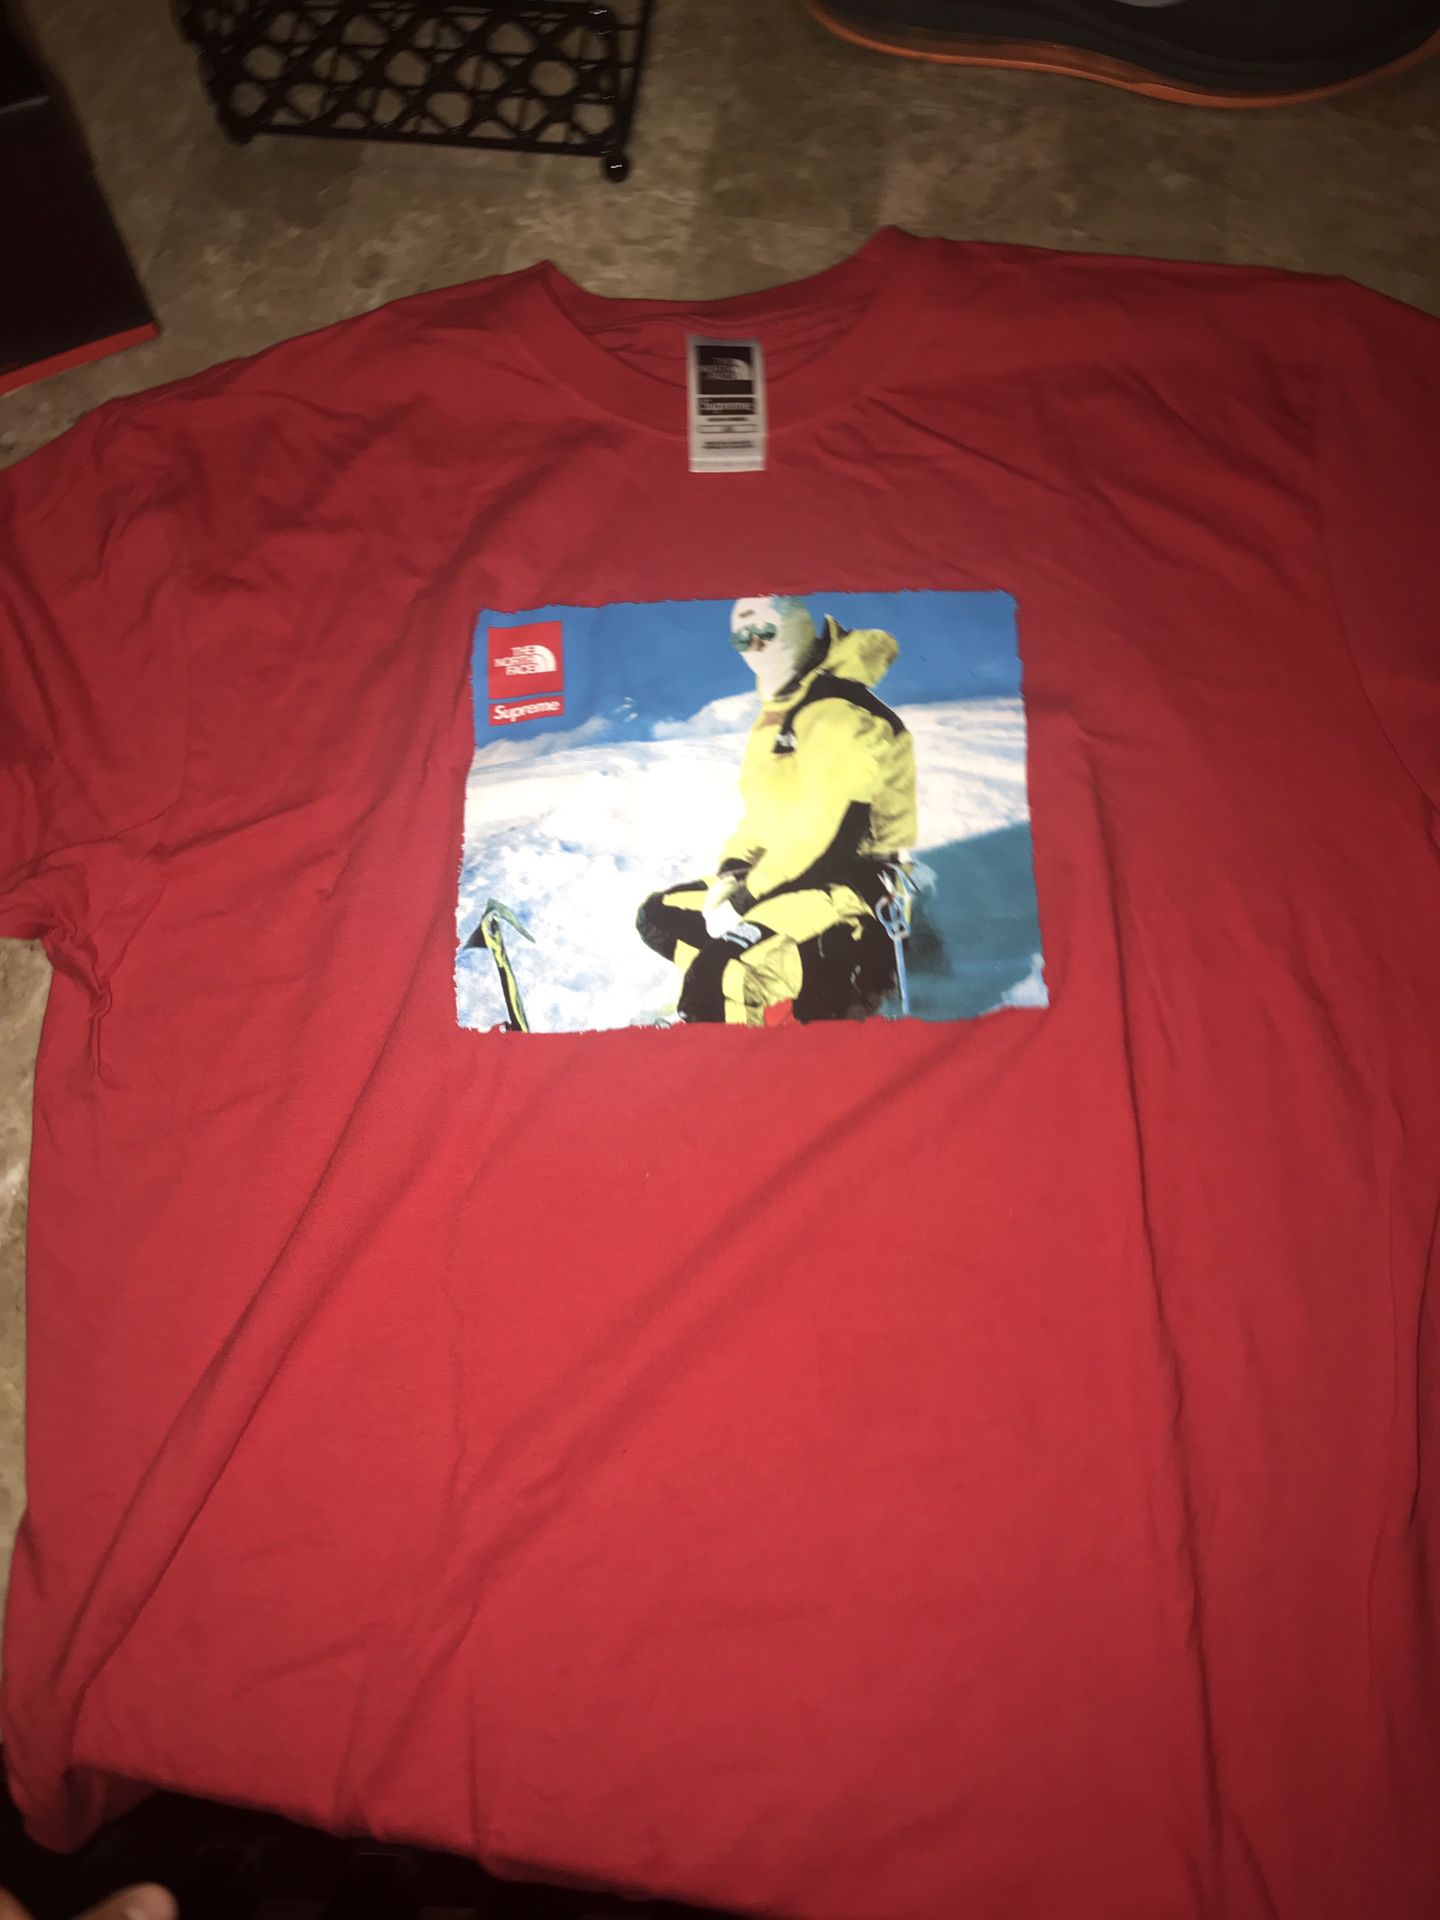 Supreme North Face Photo Tee. Size large